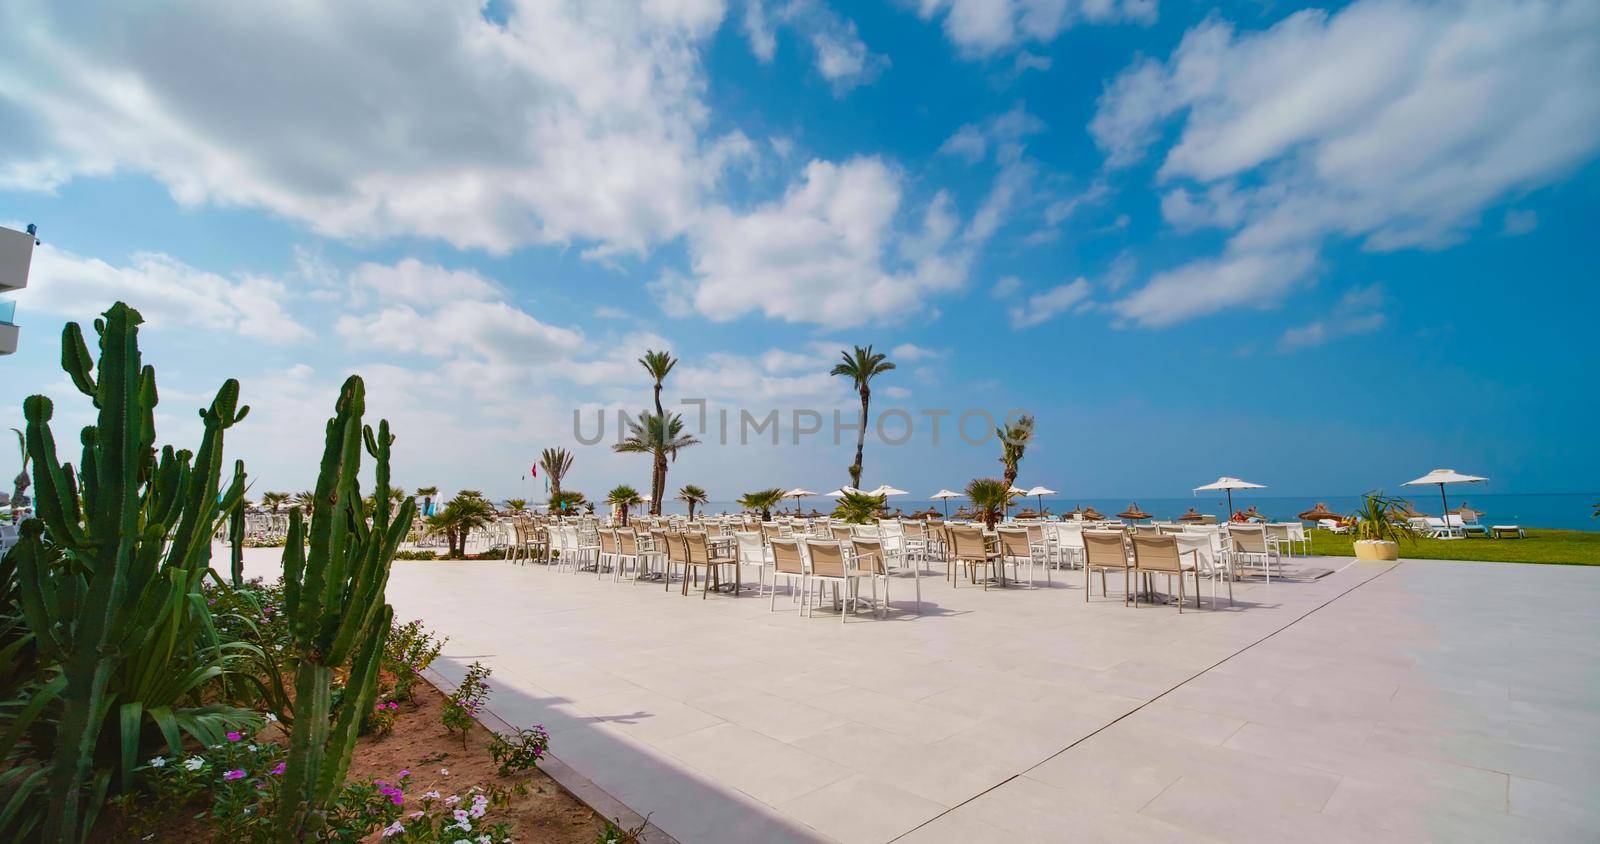 Luxury terrace on a tropical beach by RecCameraStock